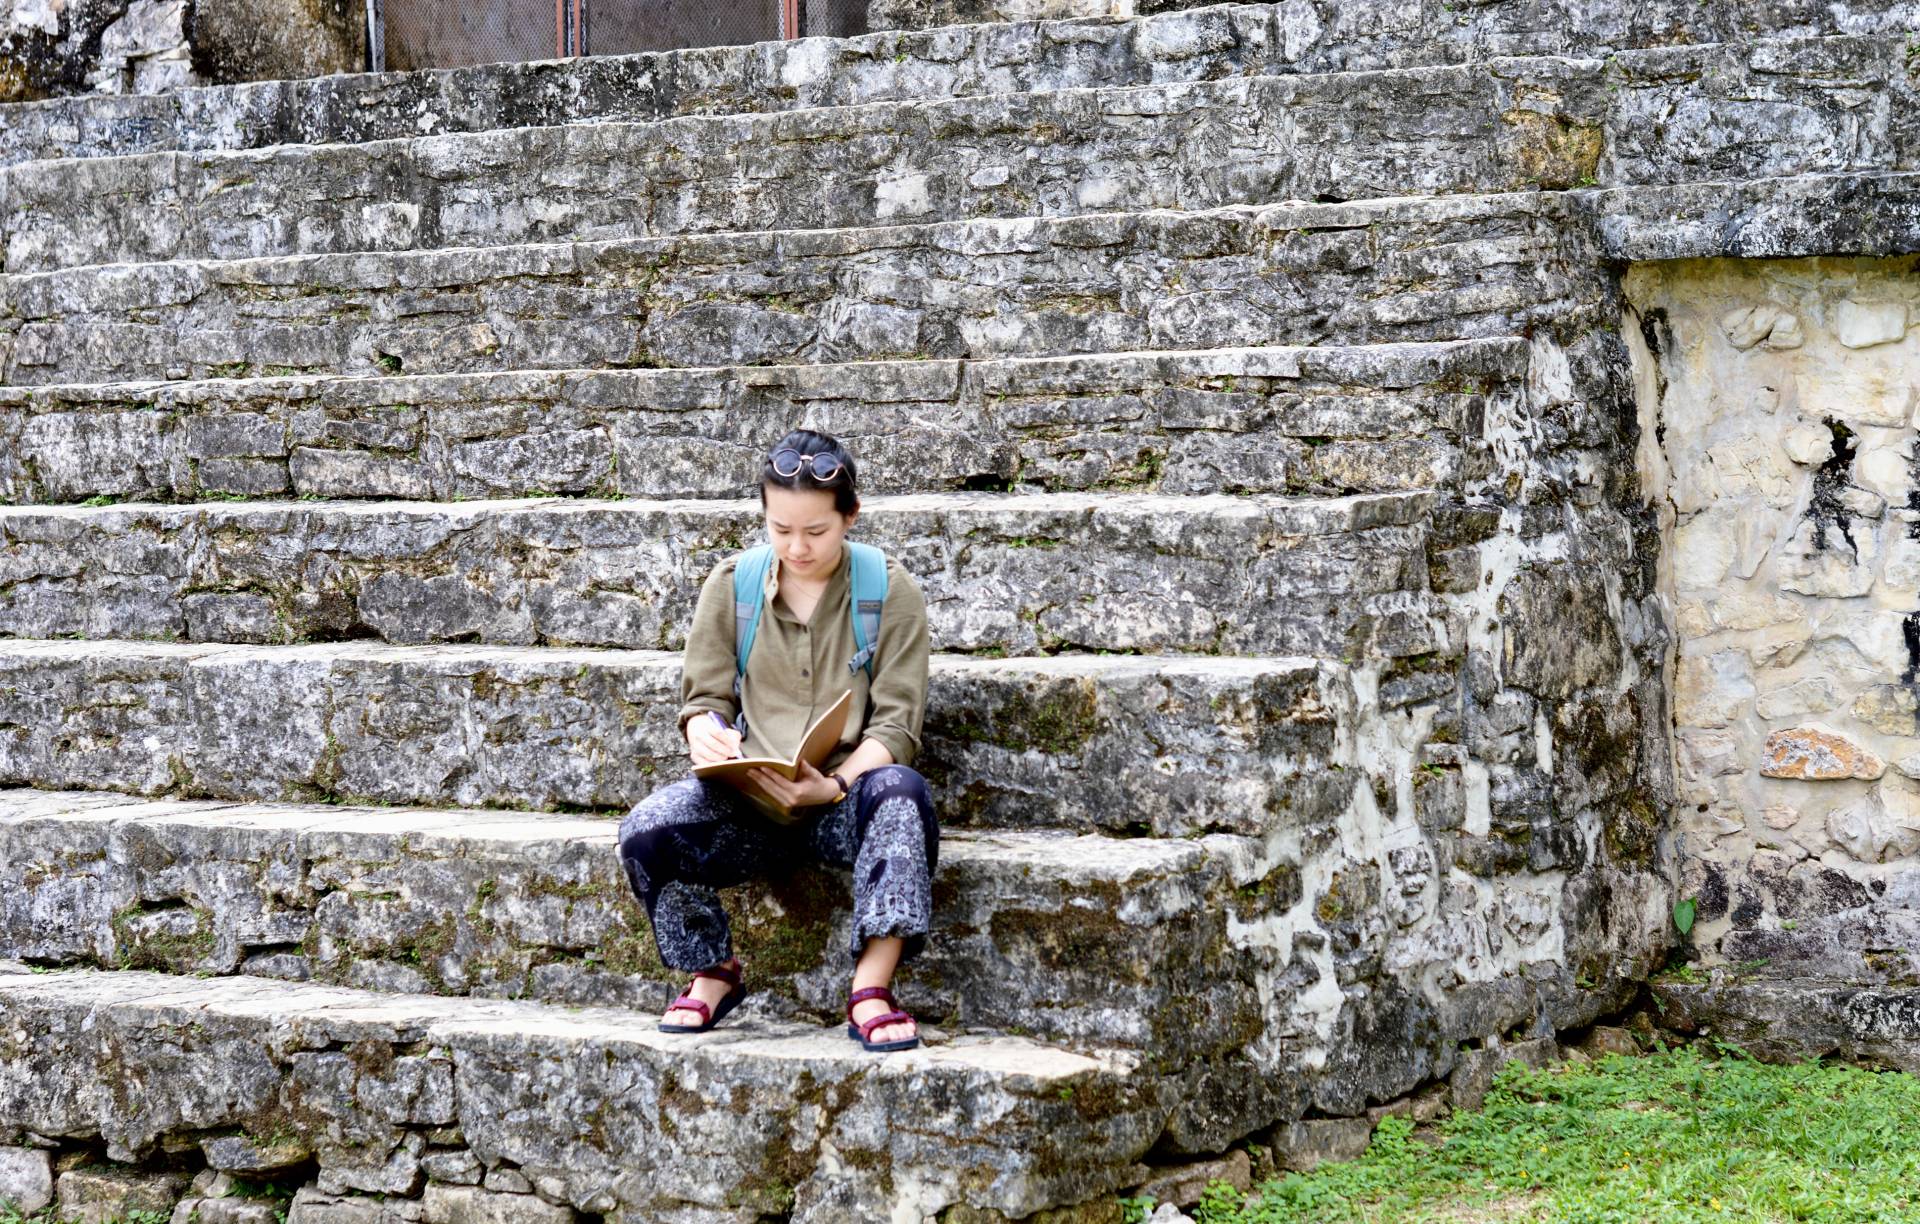 Crystal Wang sketching in the East Court of Palenque's Palace